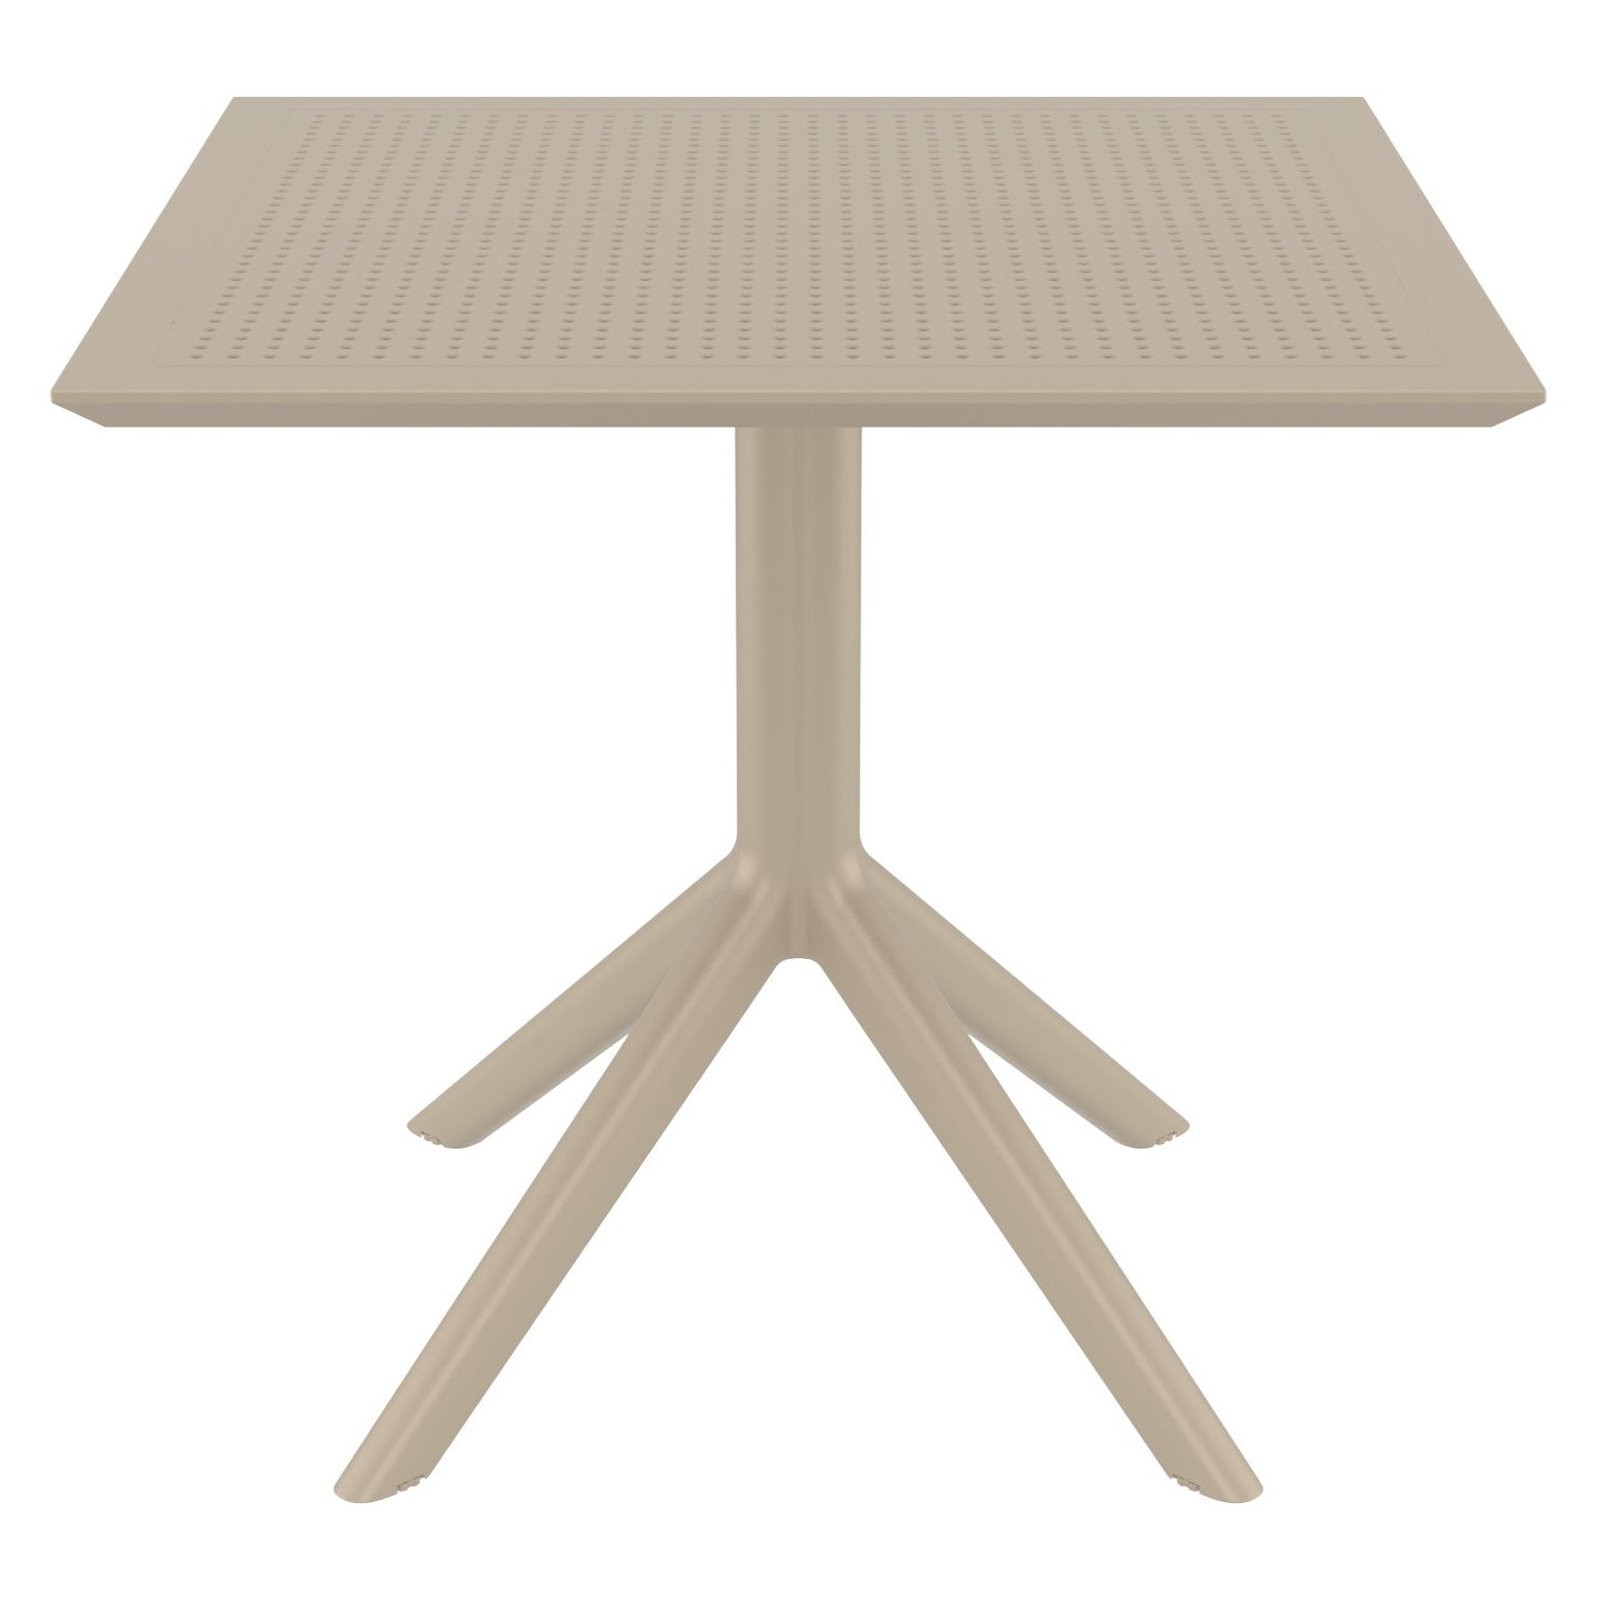 Compamia Sky 32" Square Patio Bistro Table in Taupe - image 5 of 8